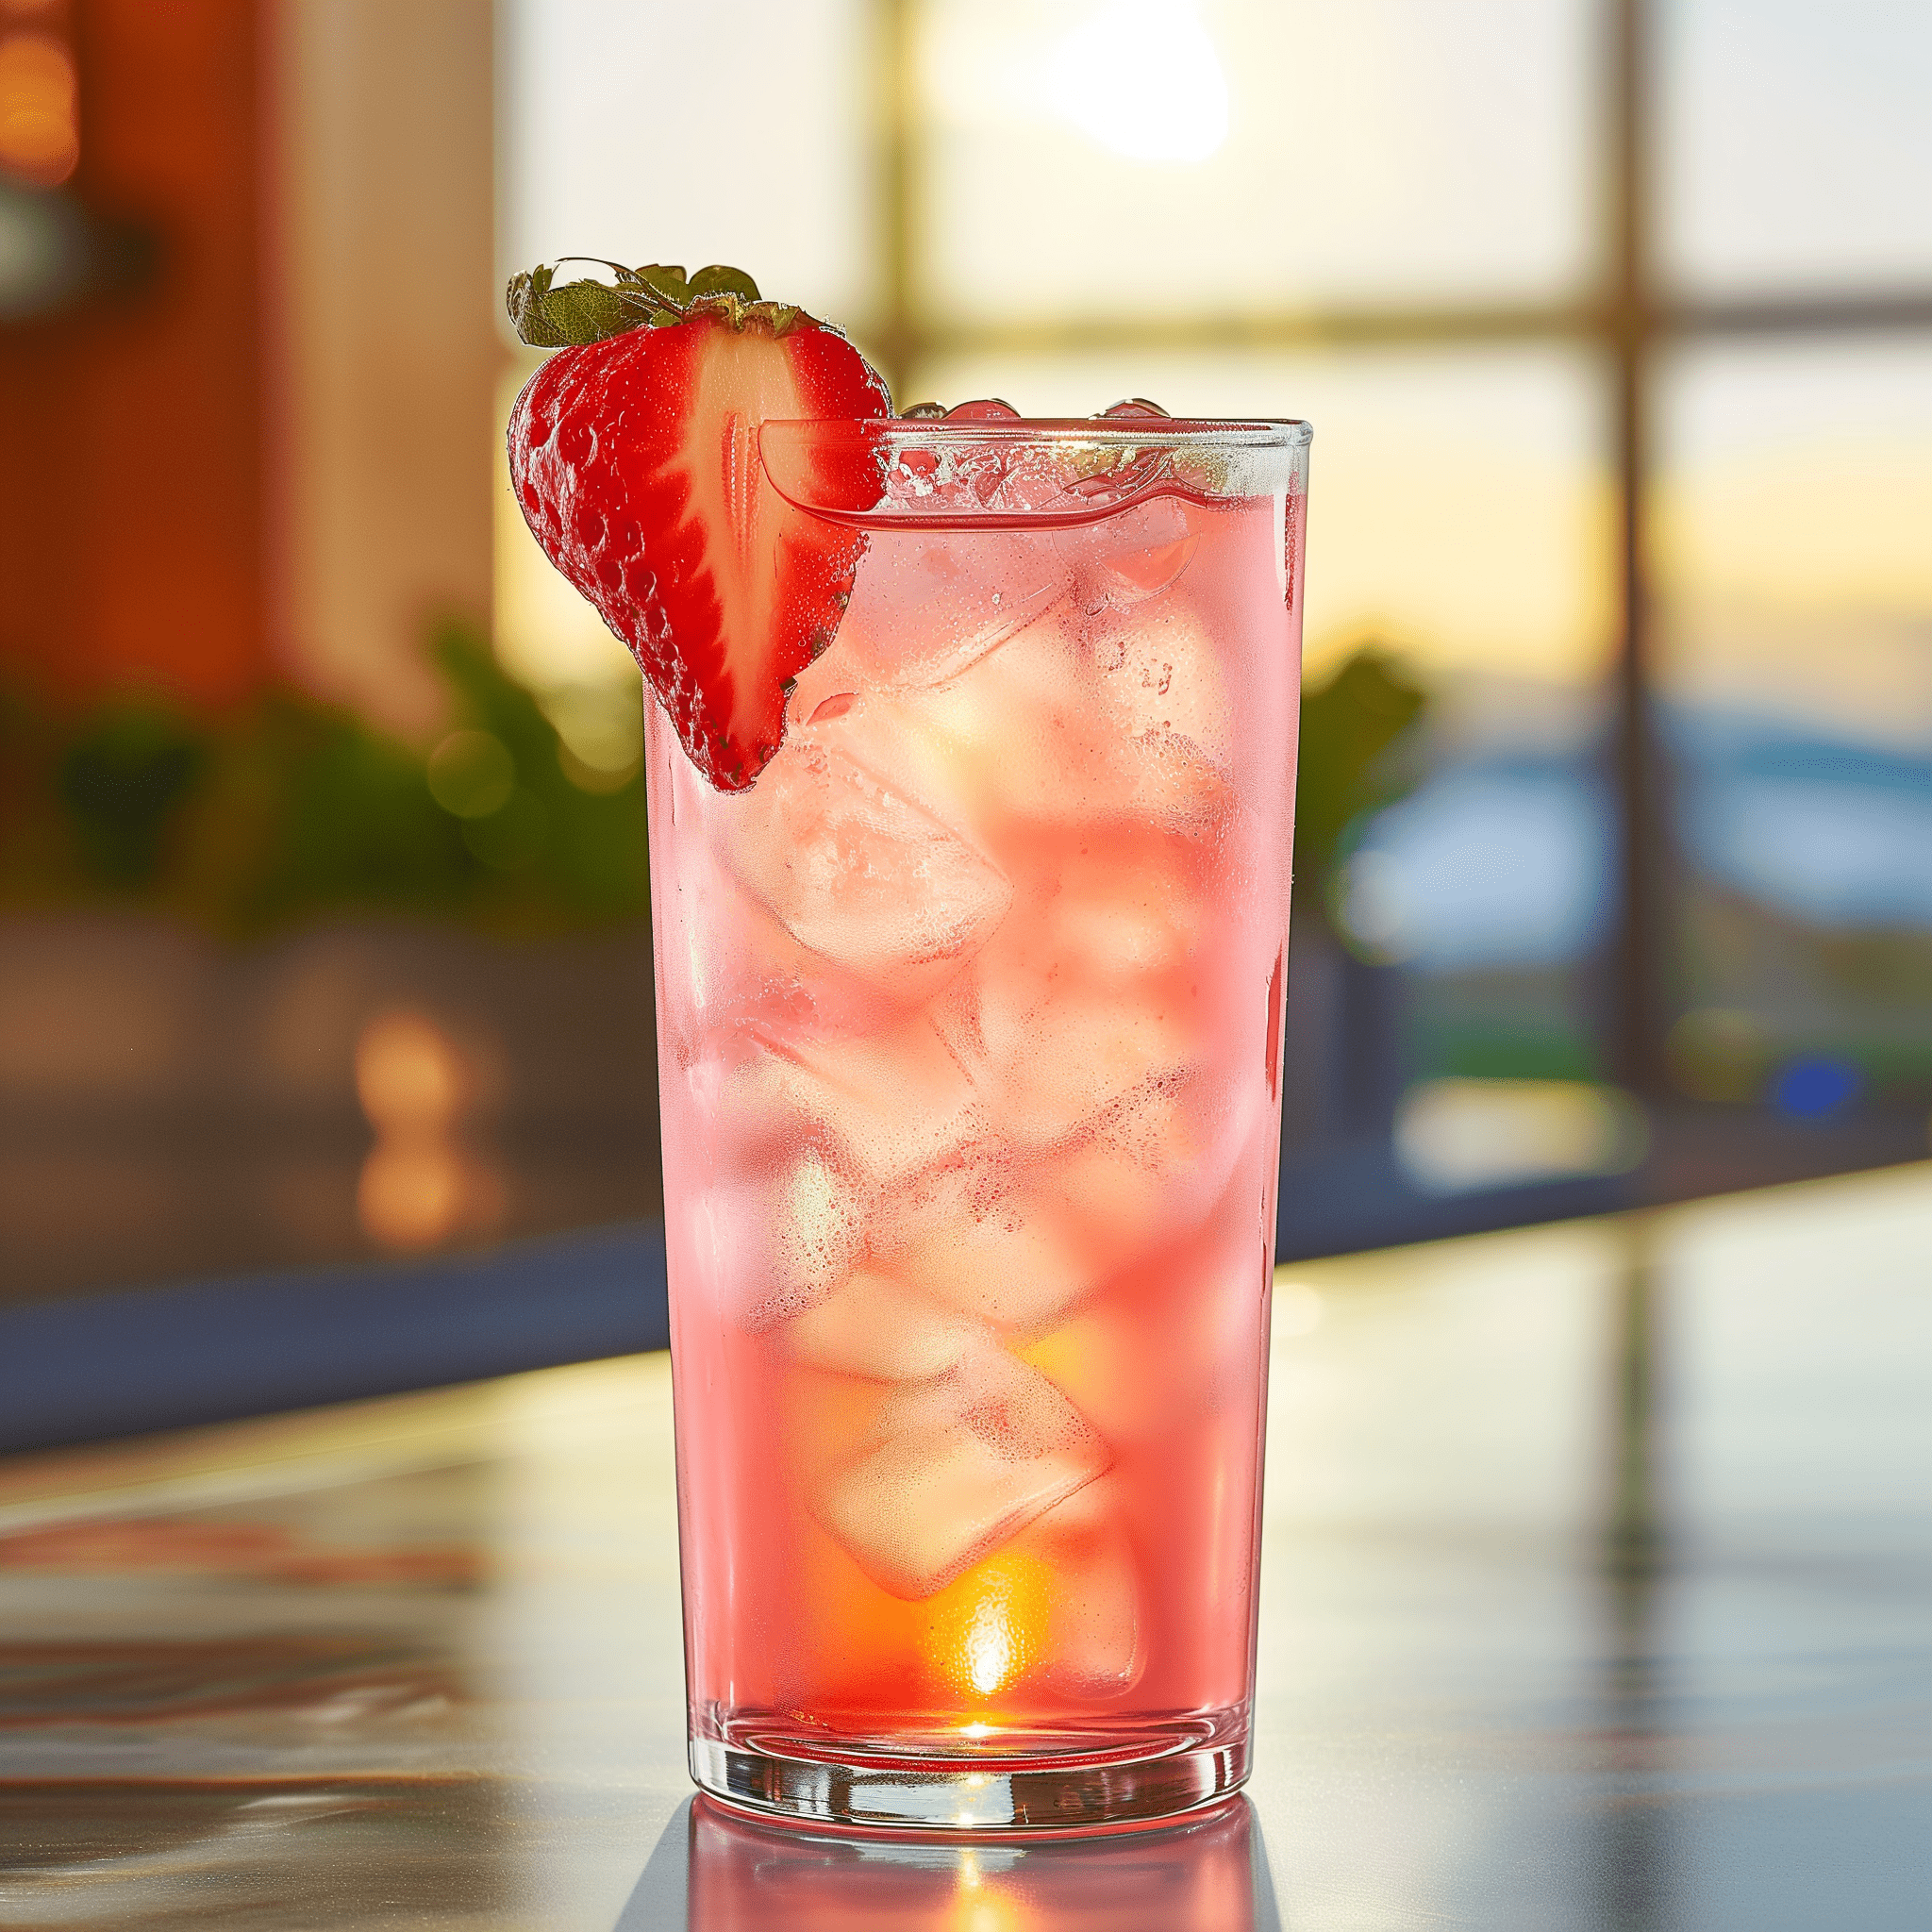 Strawberry Blonde Cocktail Recipe - The Strawberry Blonde cocktail offers a delightful blend of sweet and sour notes, with the freshness of strawberries shining through. The vodka provides a clean, crisp base, while the lemon juice adds a zesty tang. The simple syrup rounds out the drink with a touch of sweetness, and the club soda introduces a fizzy element that makes the cocktail light and refreshing.